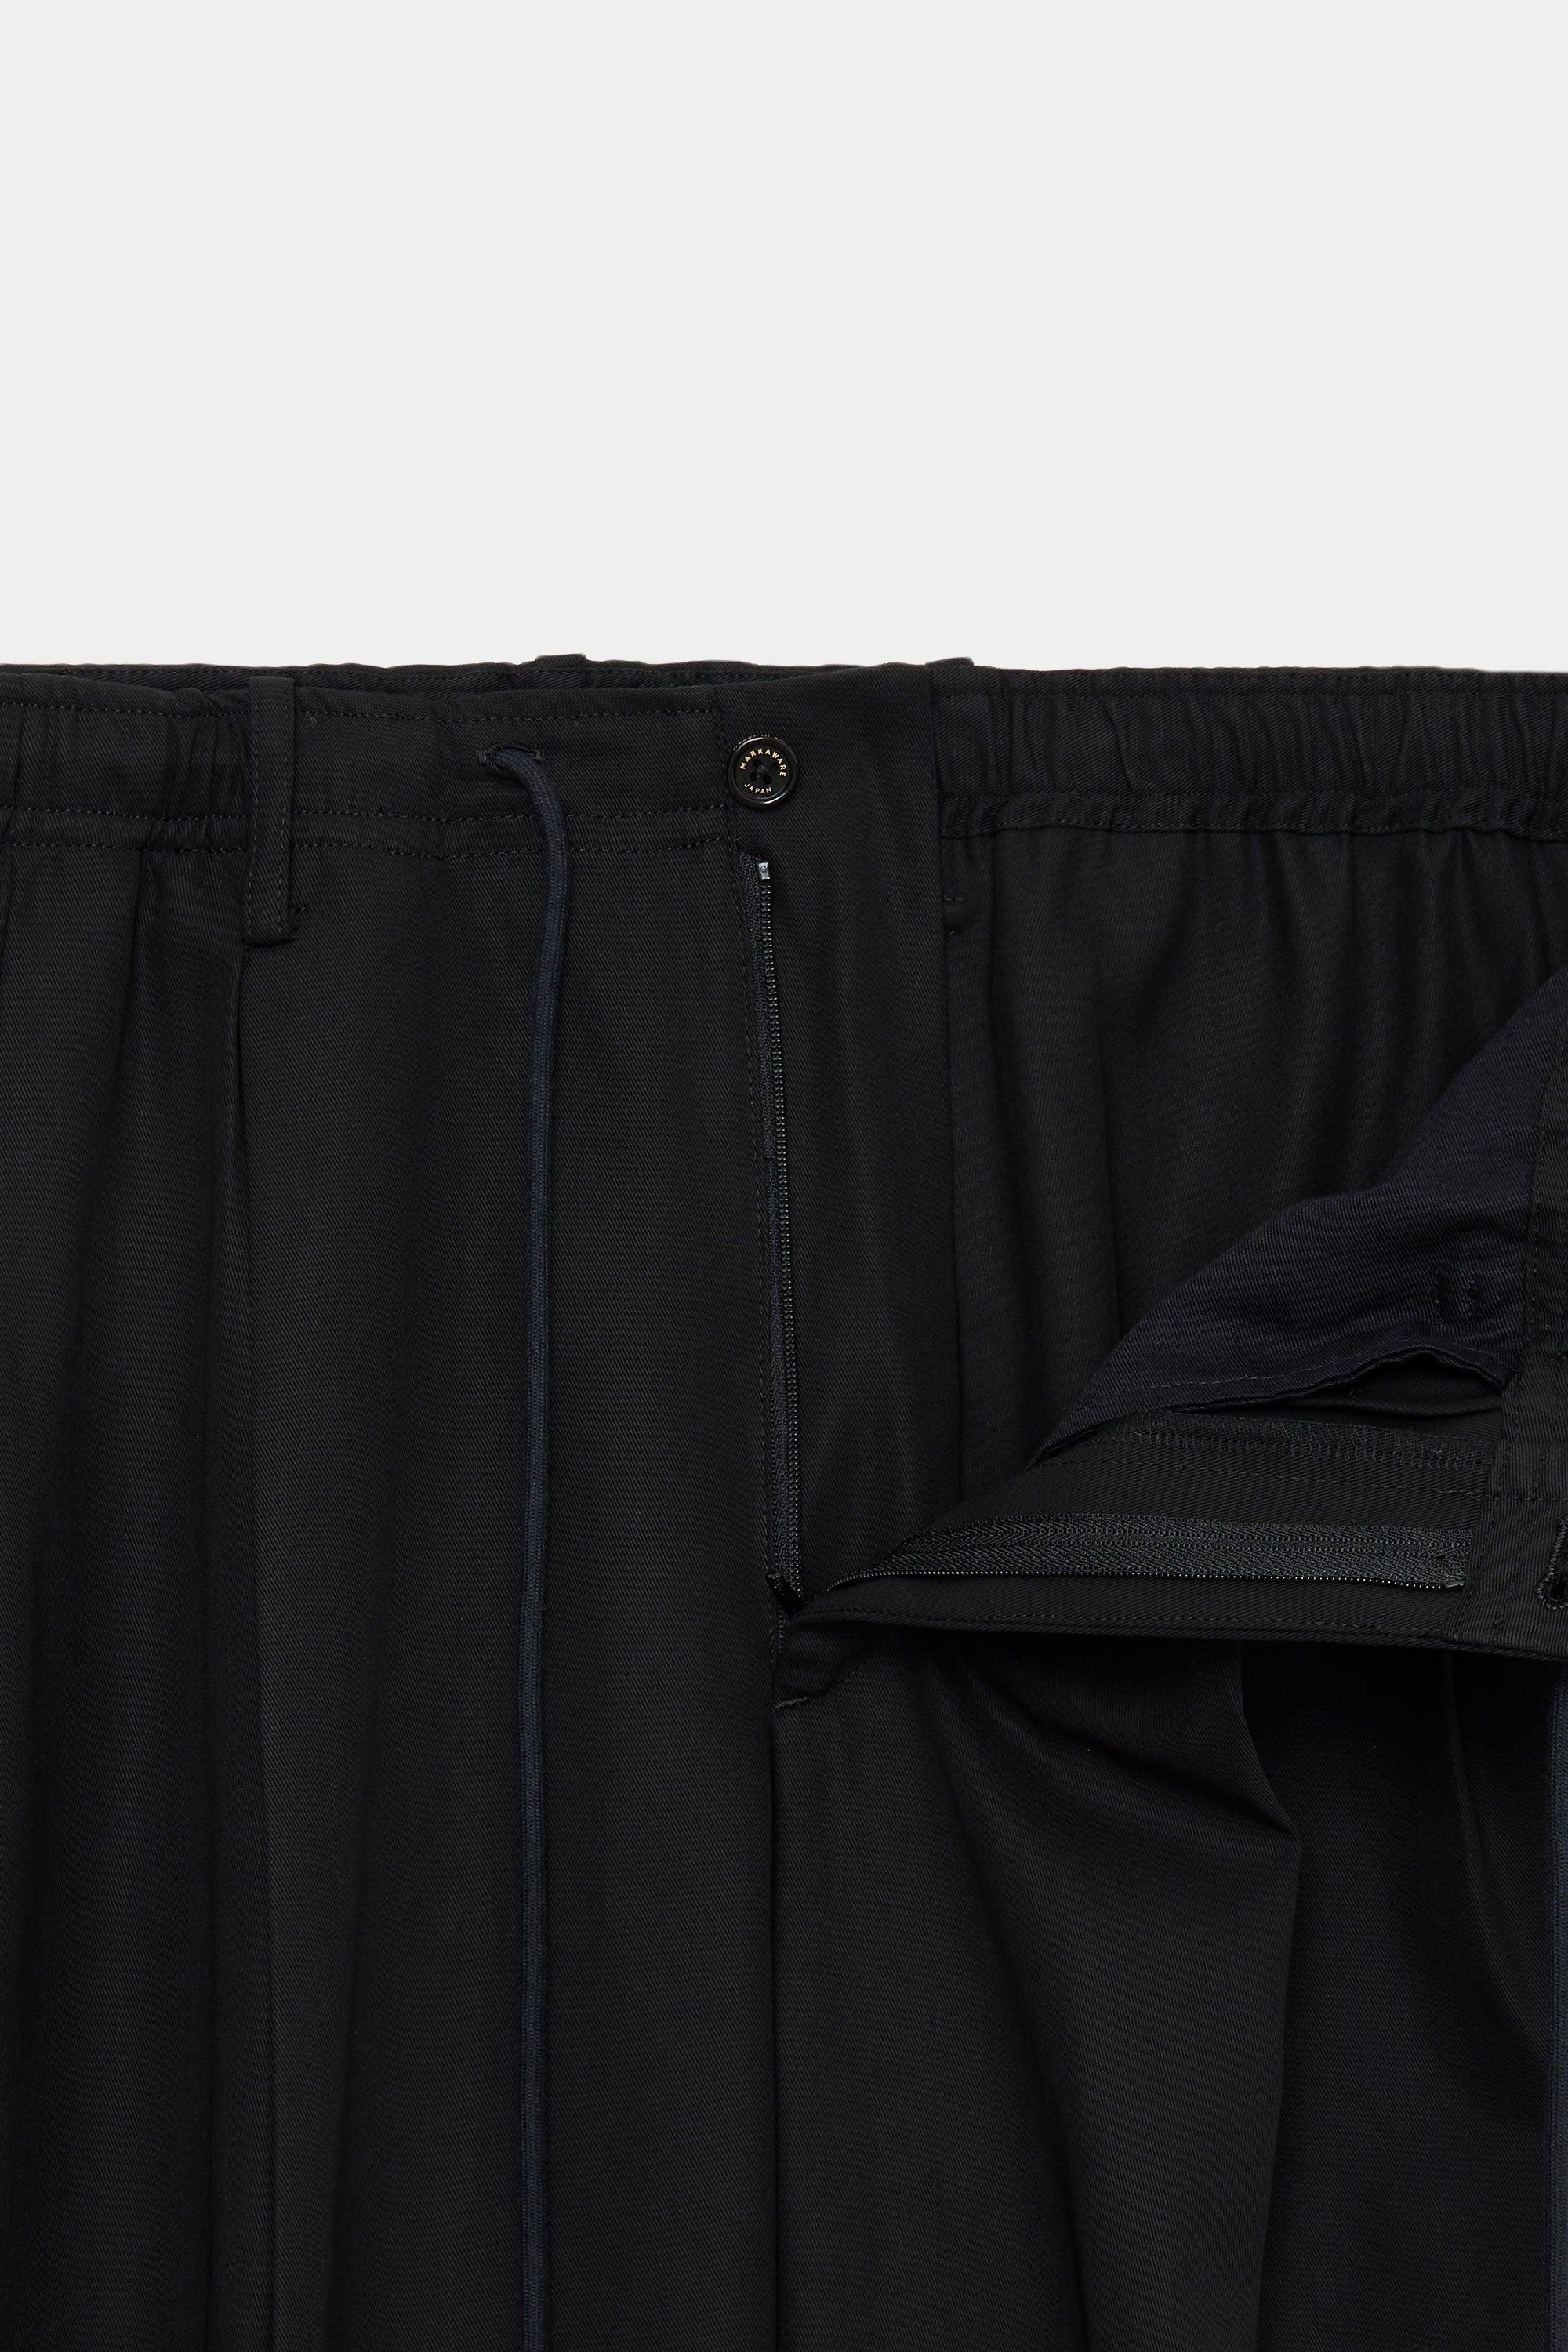 DRY VOILE TWILL DOUBLE PLEATED EASY TROUSERS, Black